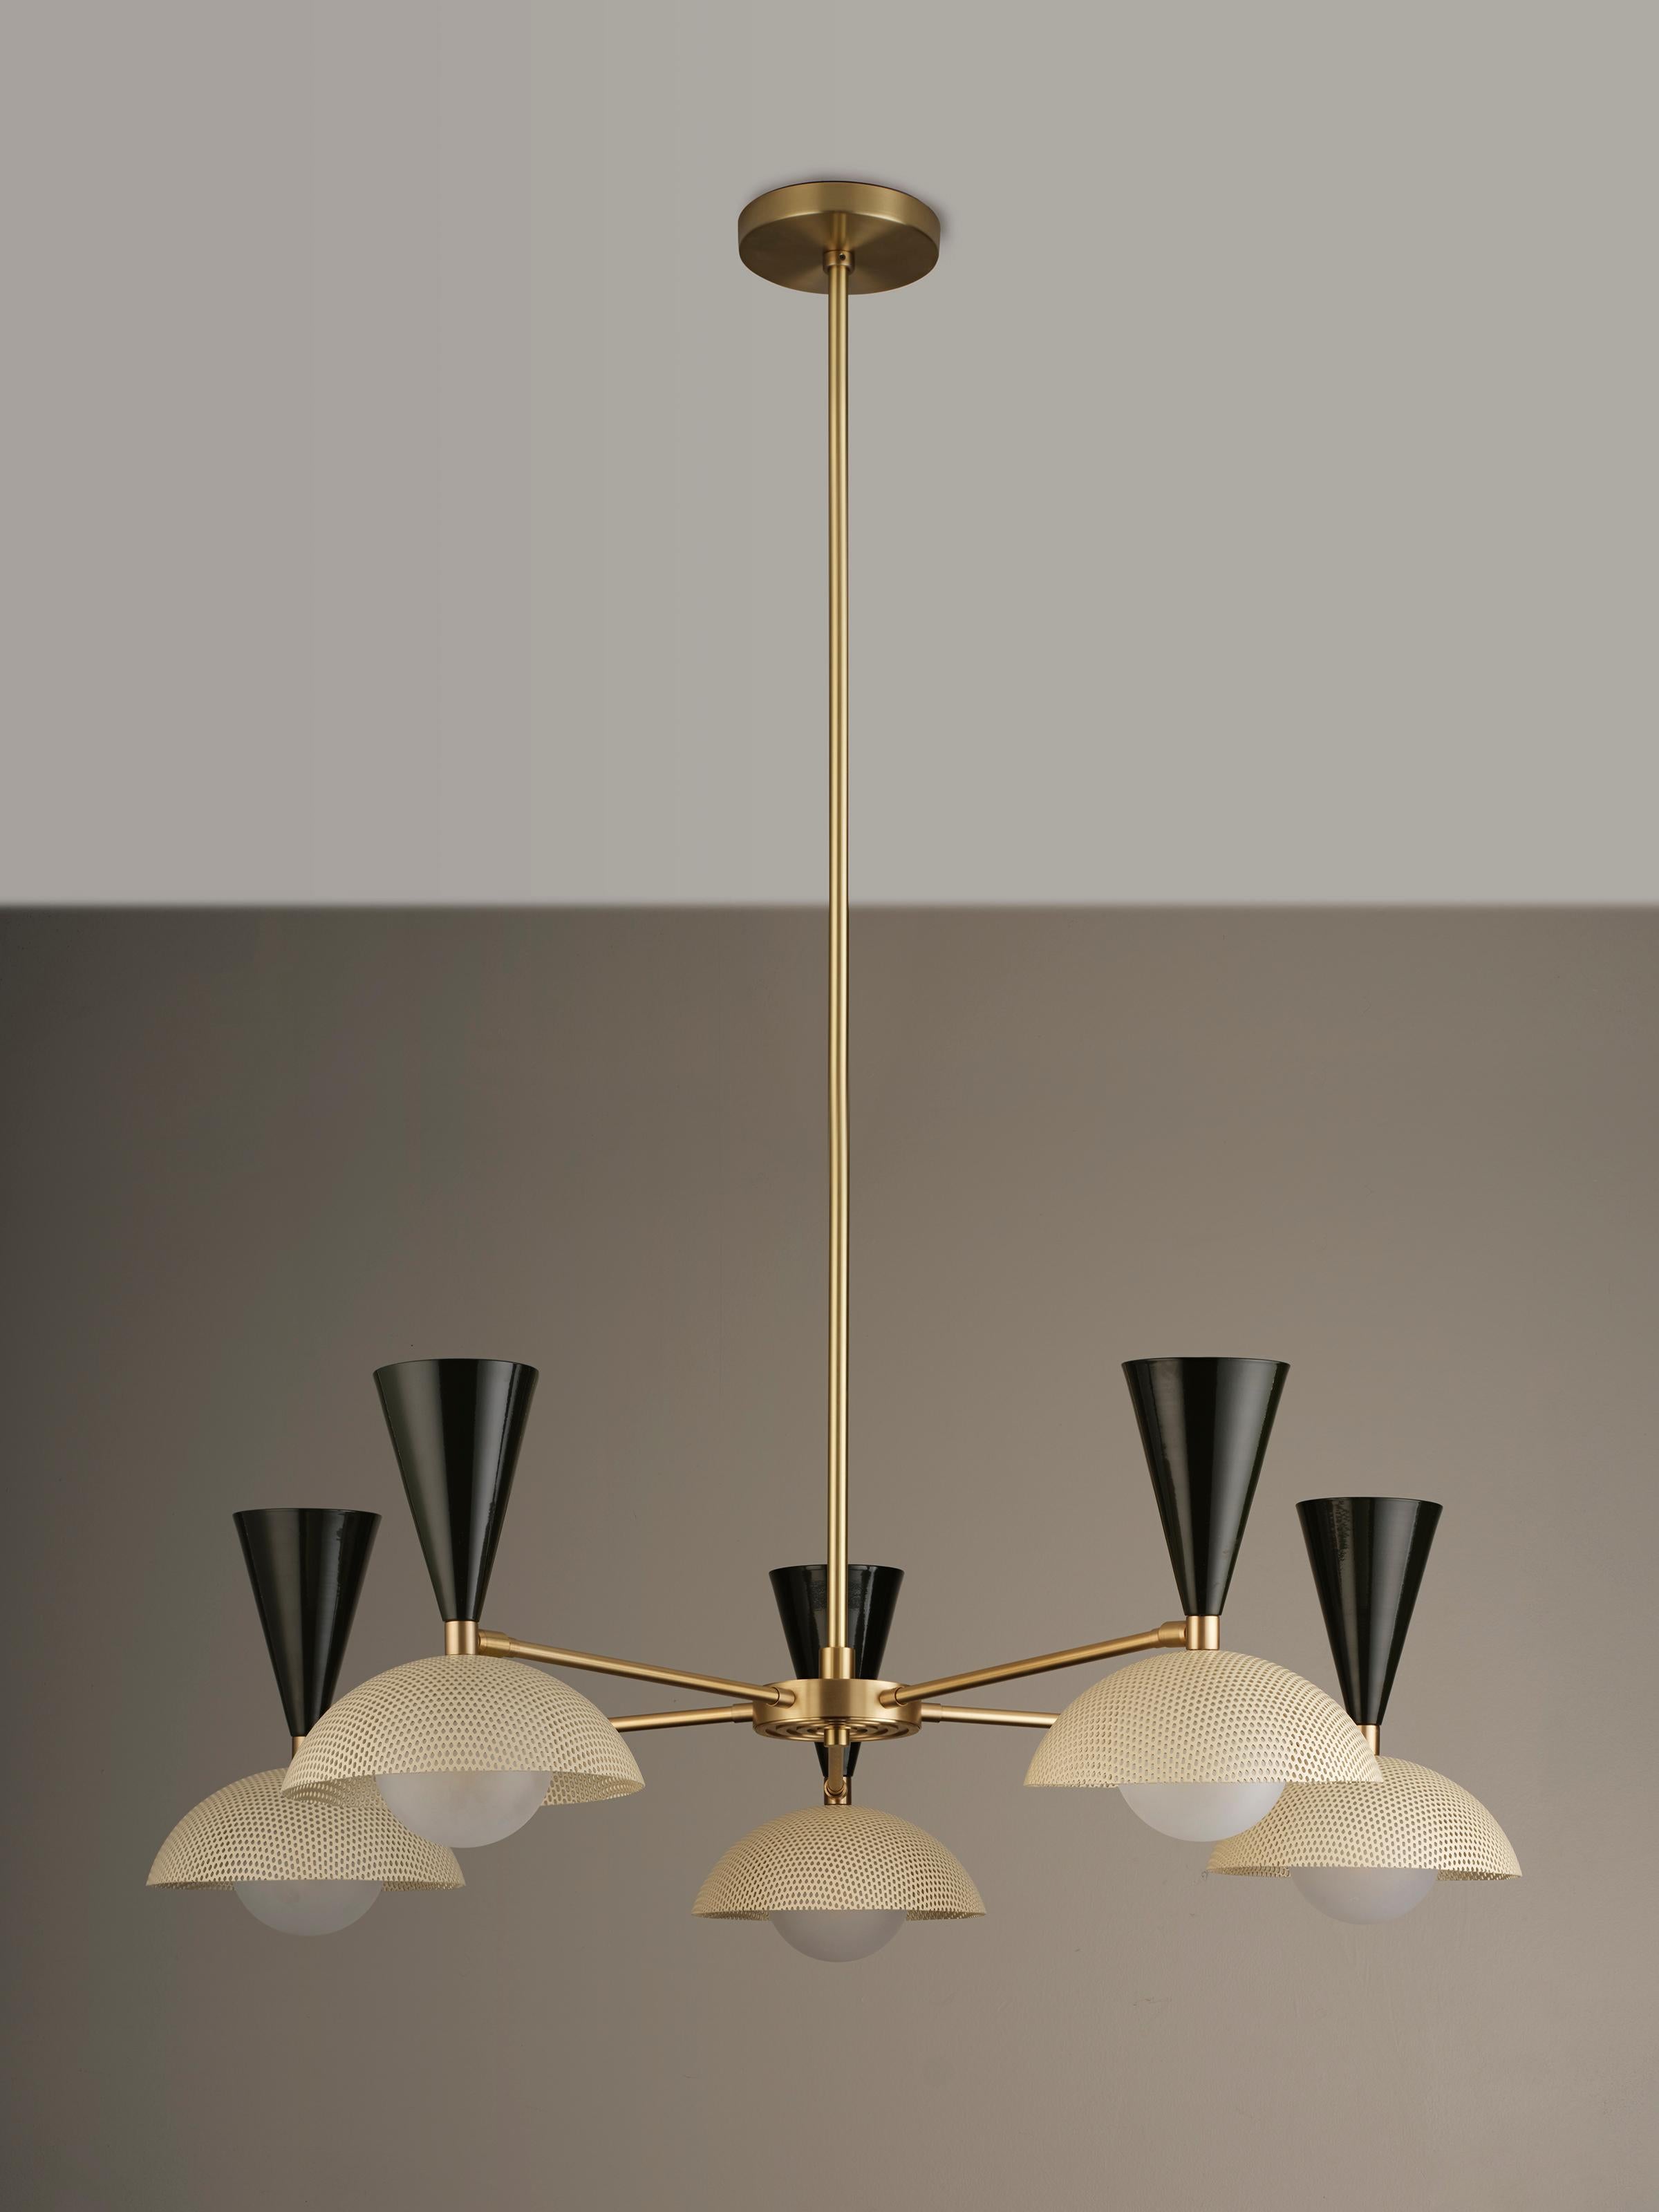 Contemporary Molto 5-Arm Ceiling Fixture in Brushed Brass + Enameled Mesh, Blueprint Lighting